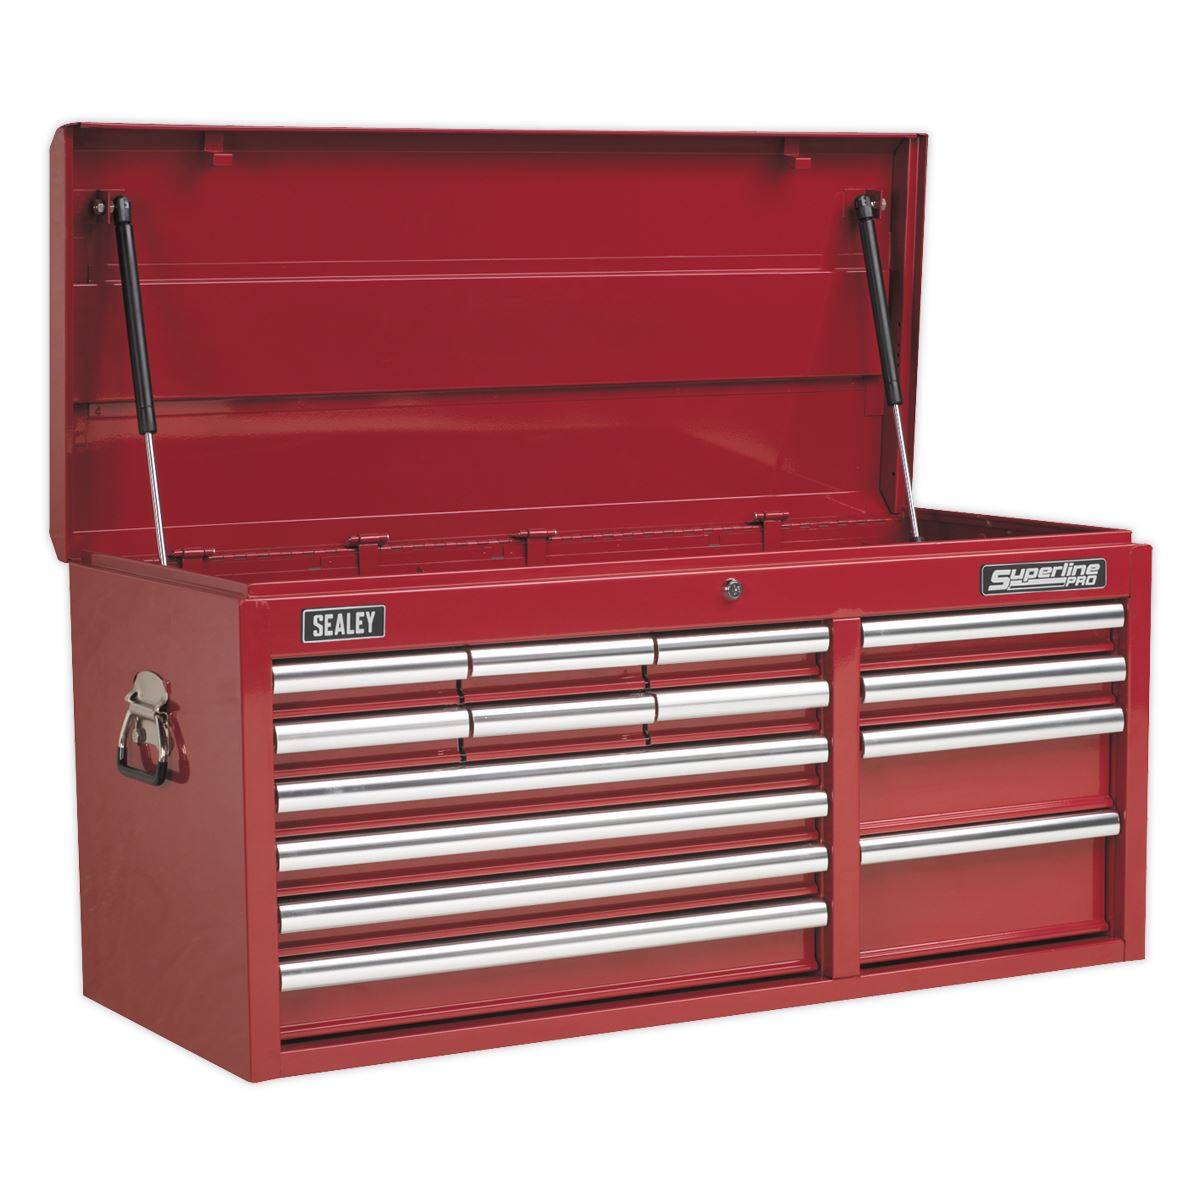 Sealey Superline Pro Topchest 14 Drawer with Ball-Bearing Slides Heavy-Duty - Red